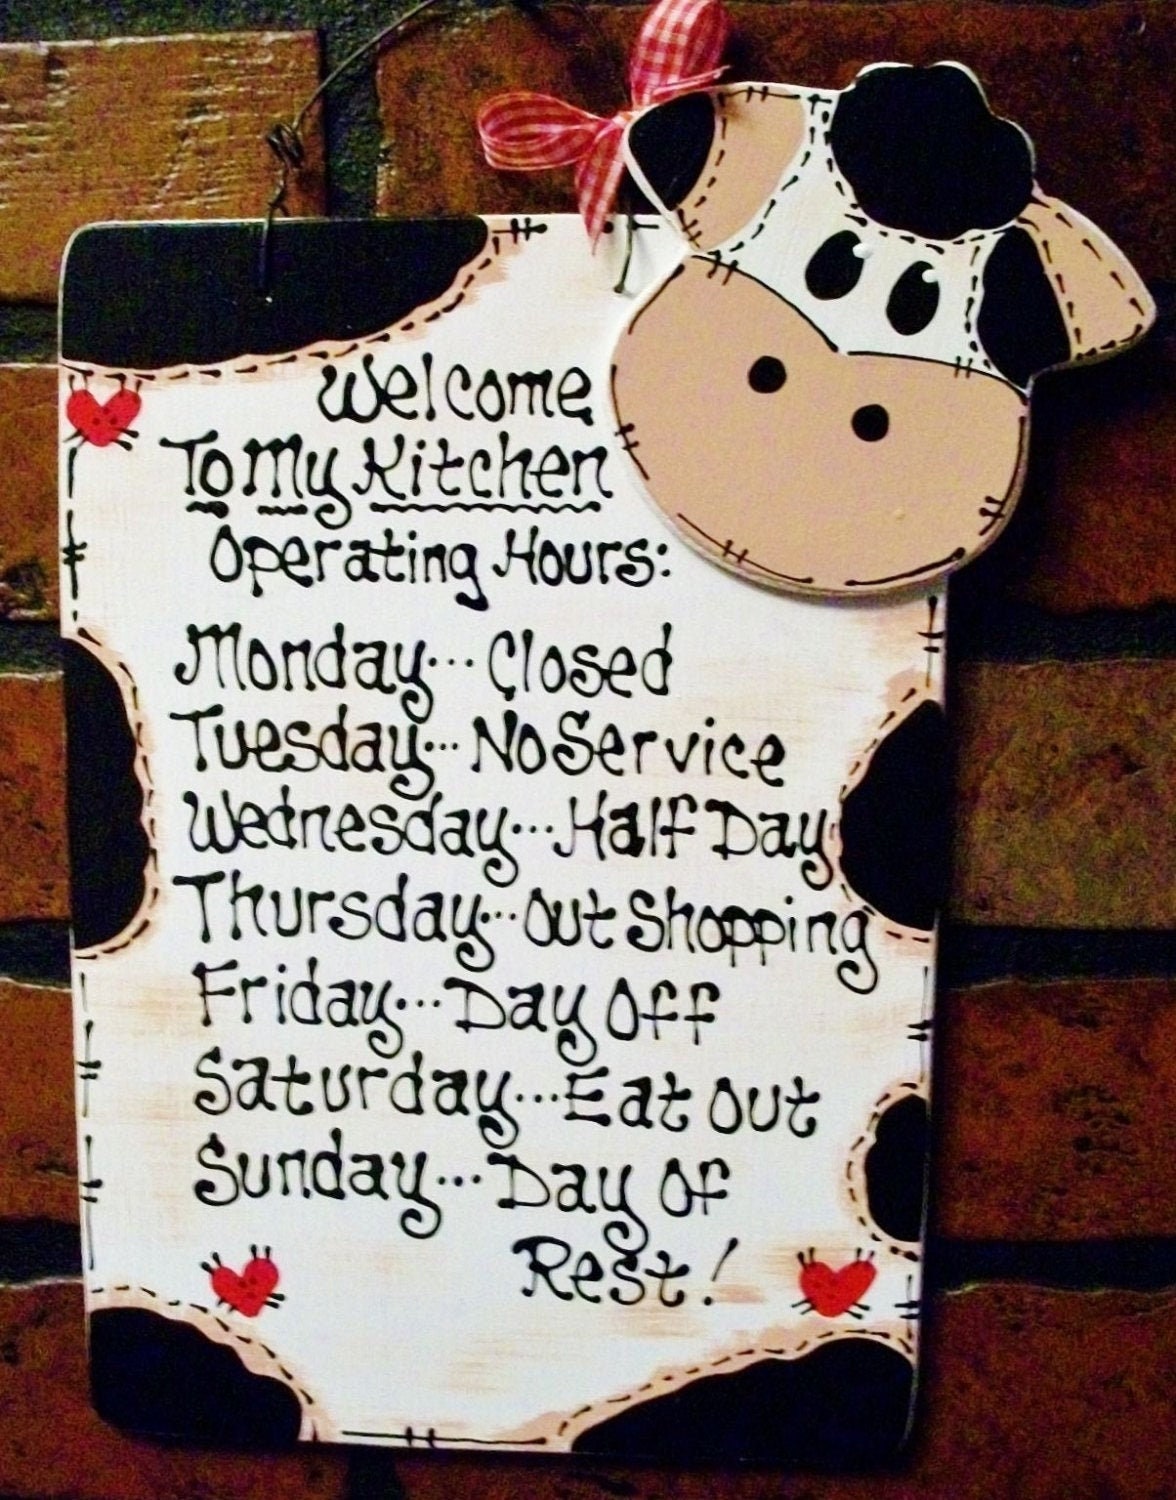 11 Kitchen Opening Hours Tabletop Sign by Ashland®